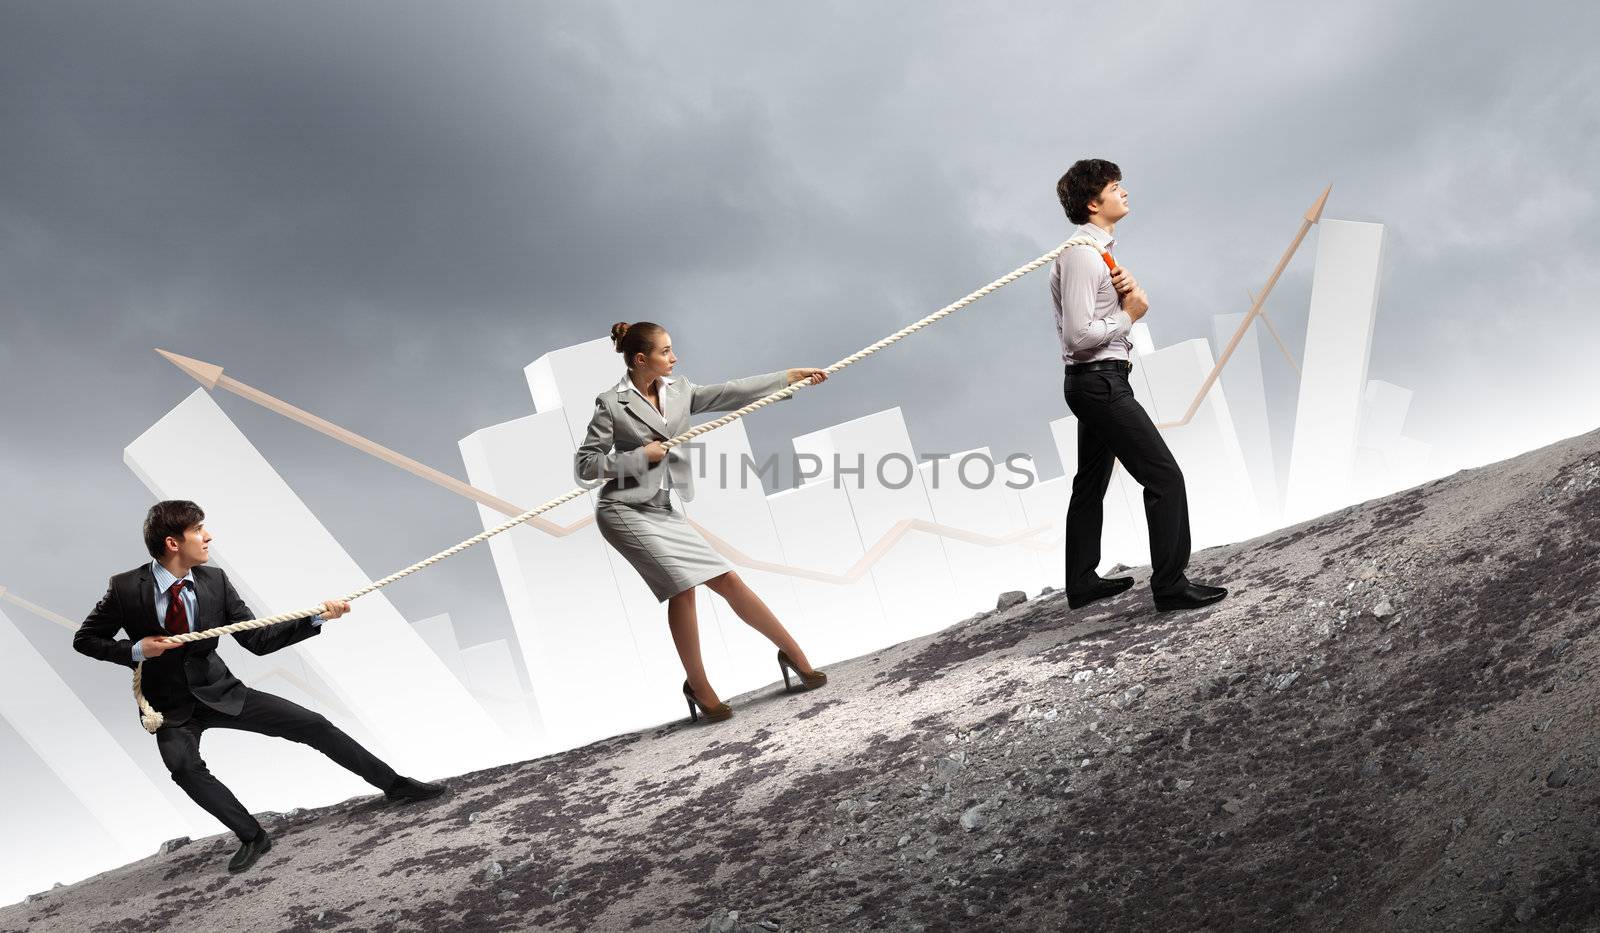 Image of three businesspeople pulling rope with bars picture in background